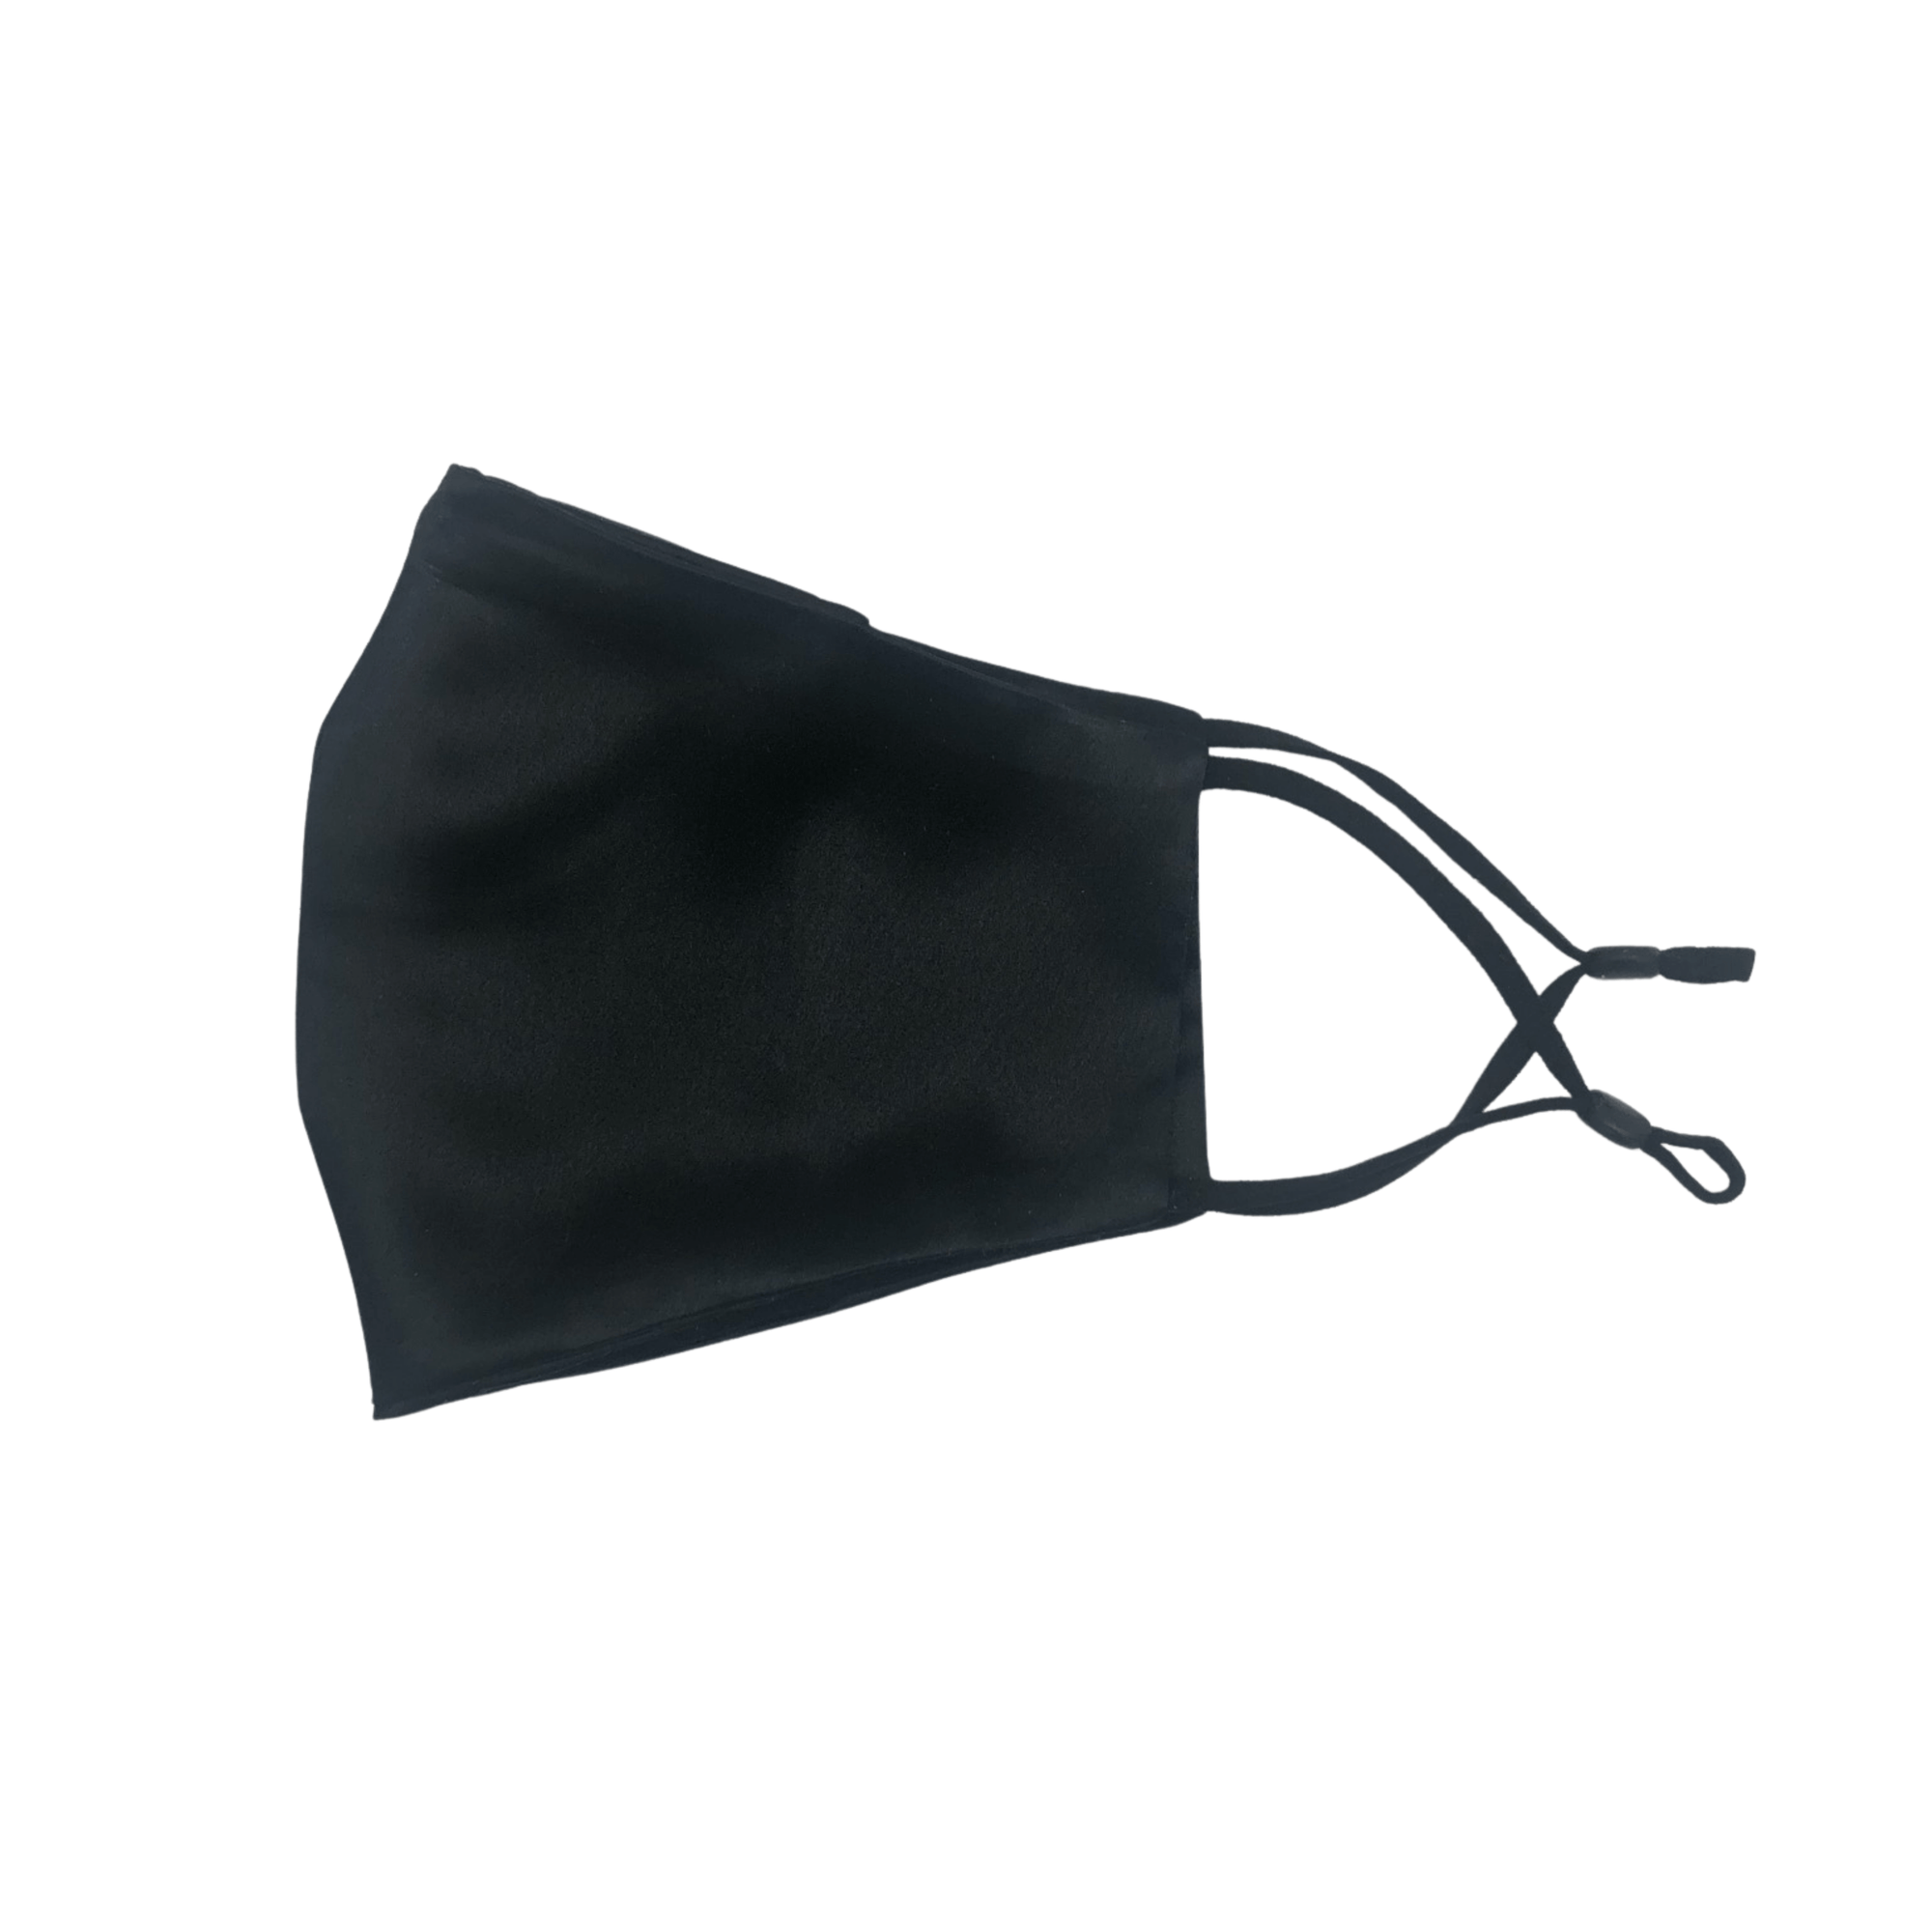 black_adult_reusable_mulberry_silk_face_mask_covering_3_layers_triple_layered_pm_2.5_filters_1